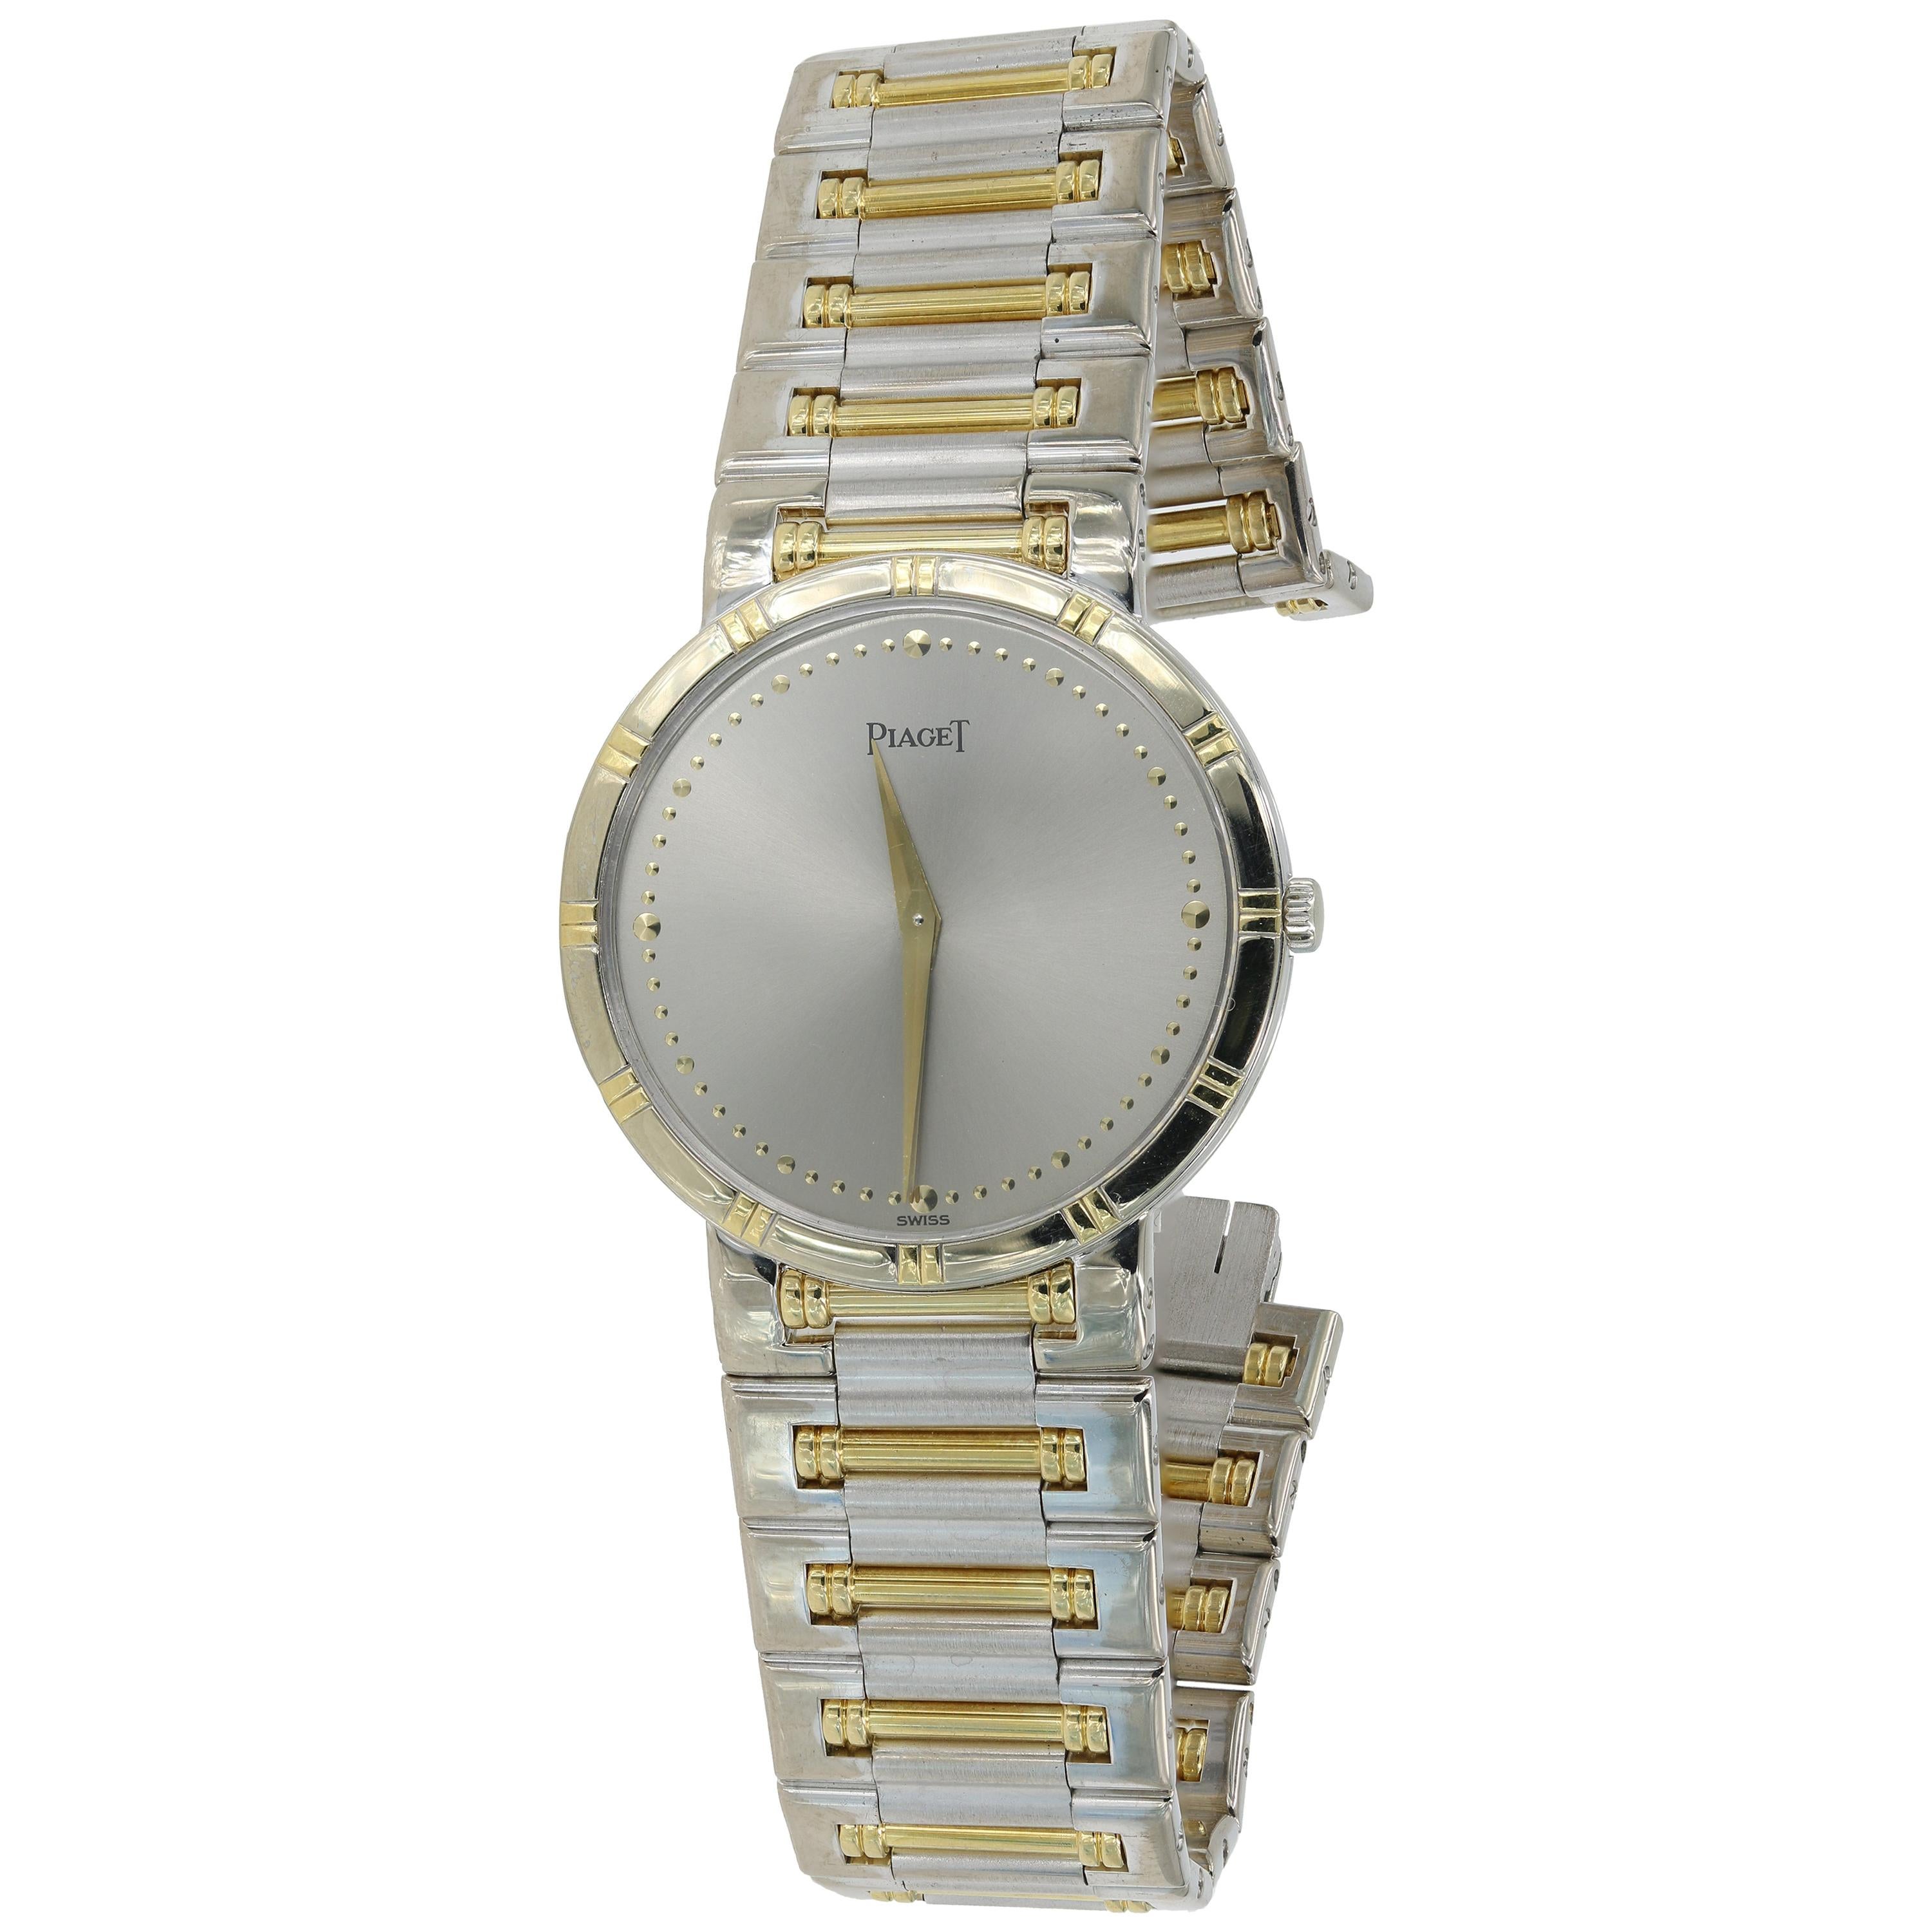 Piaget "Dancer" Watch in Two-Tone 18 Karat White and Yellow Gold 'Pre-Owned'